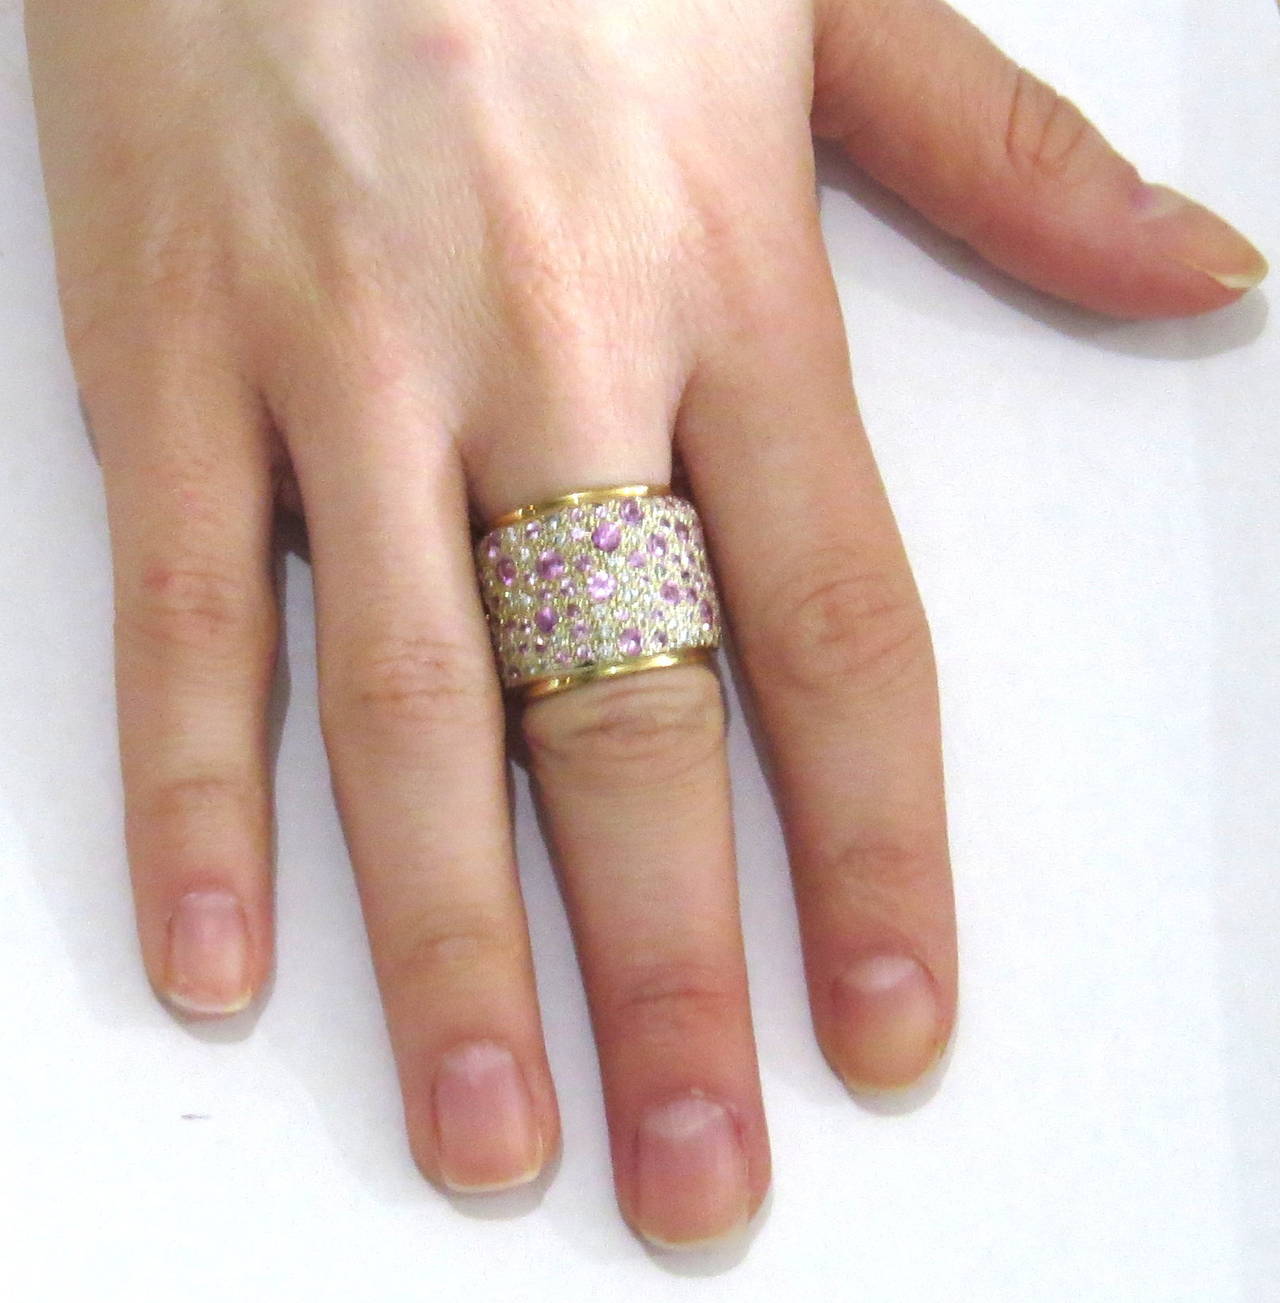 wide gold band ring with diamonds